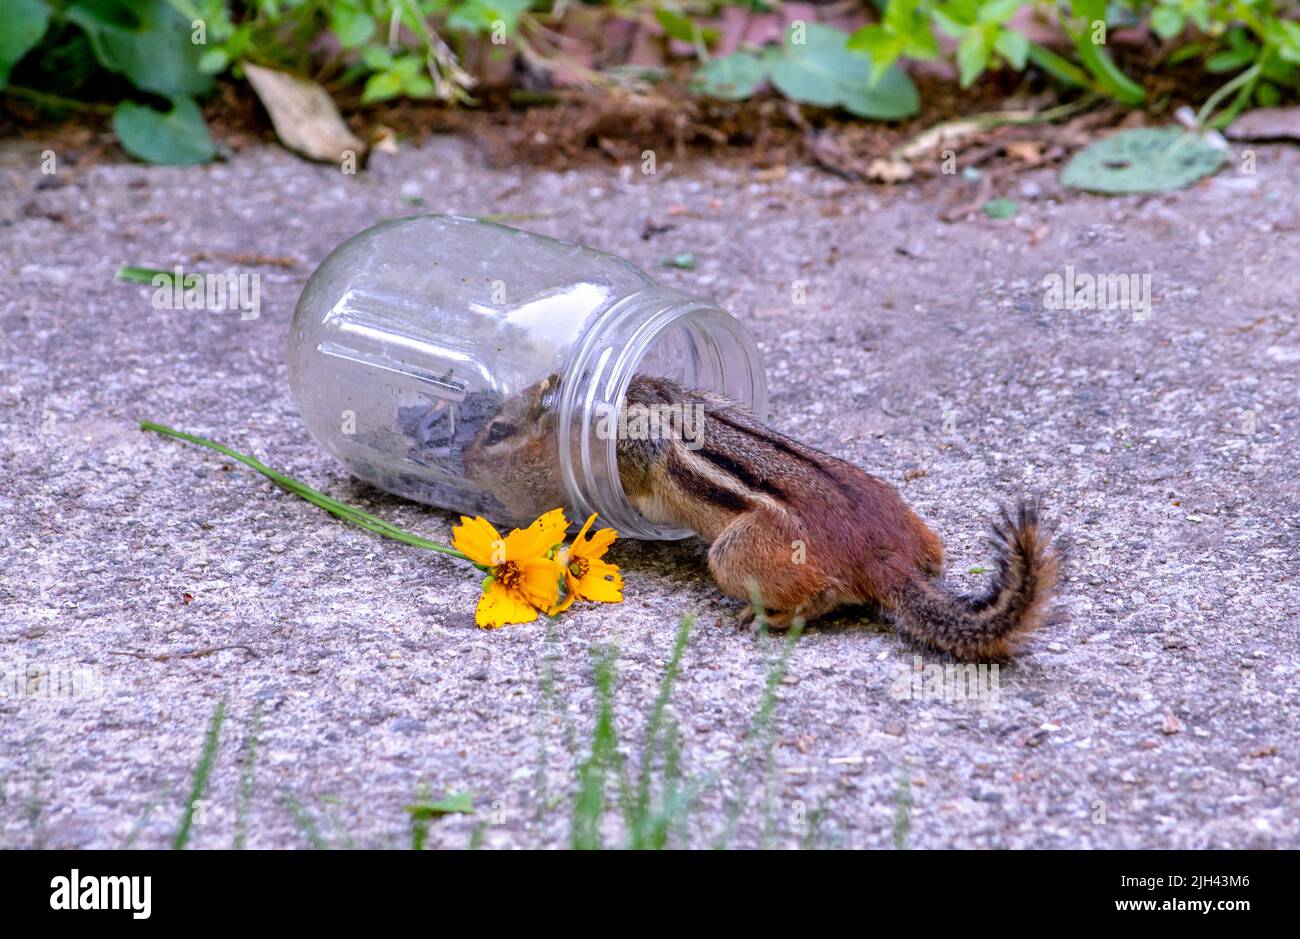 Wild chipmunk knocks over a jar of sunflower seeds to get to the delicious nibbles inside Stock Photo